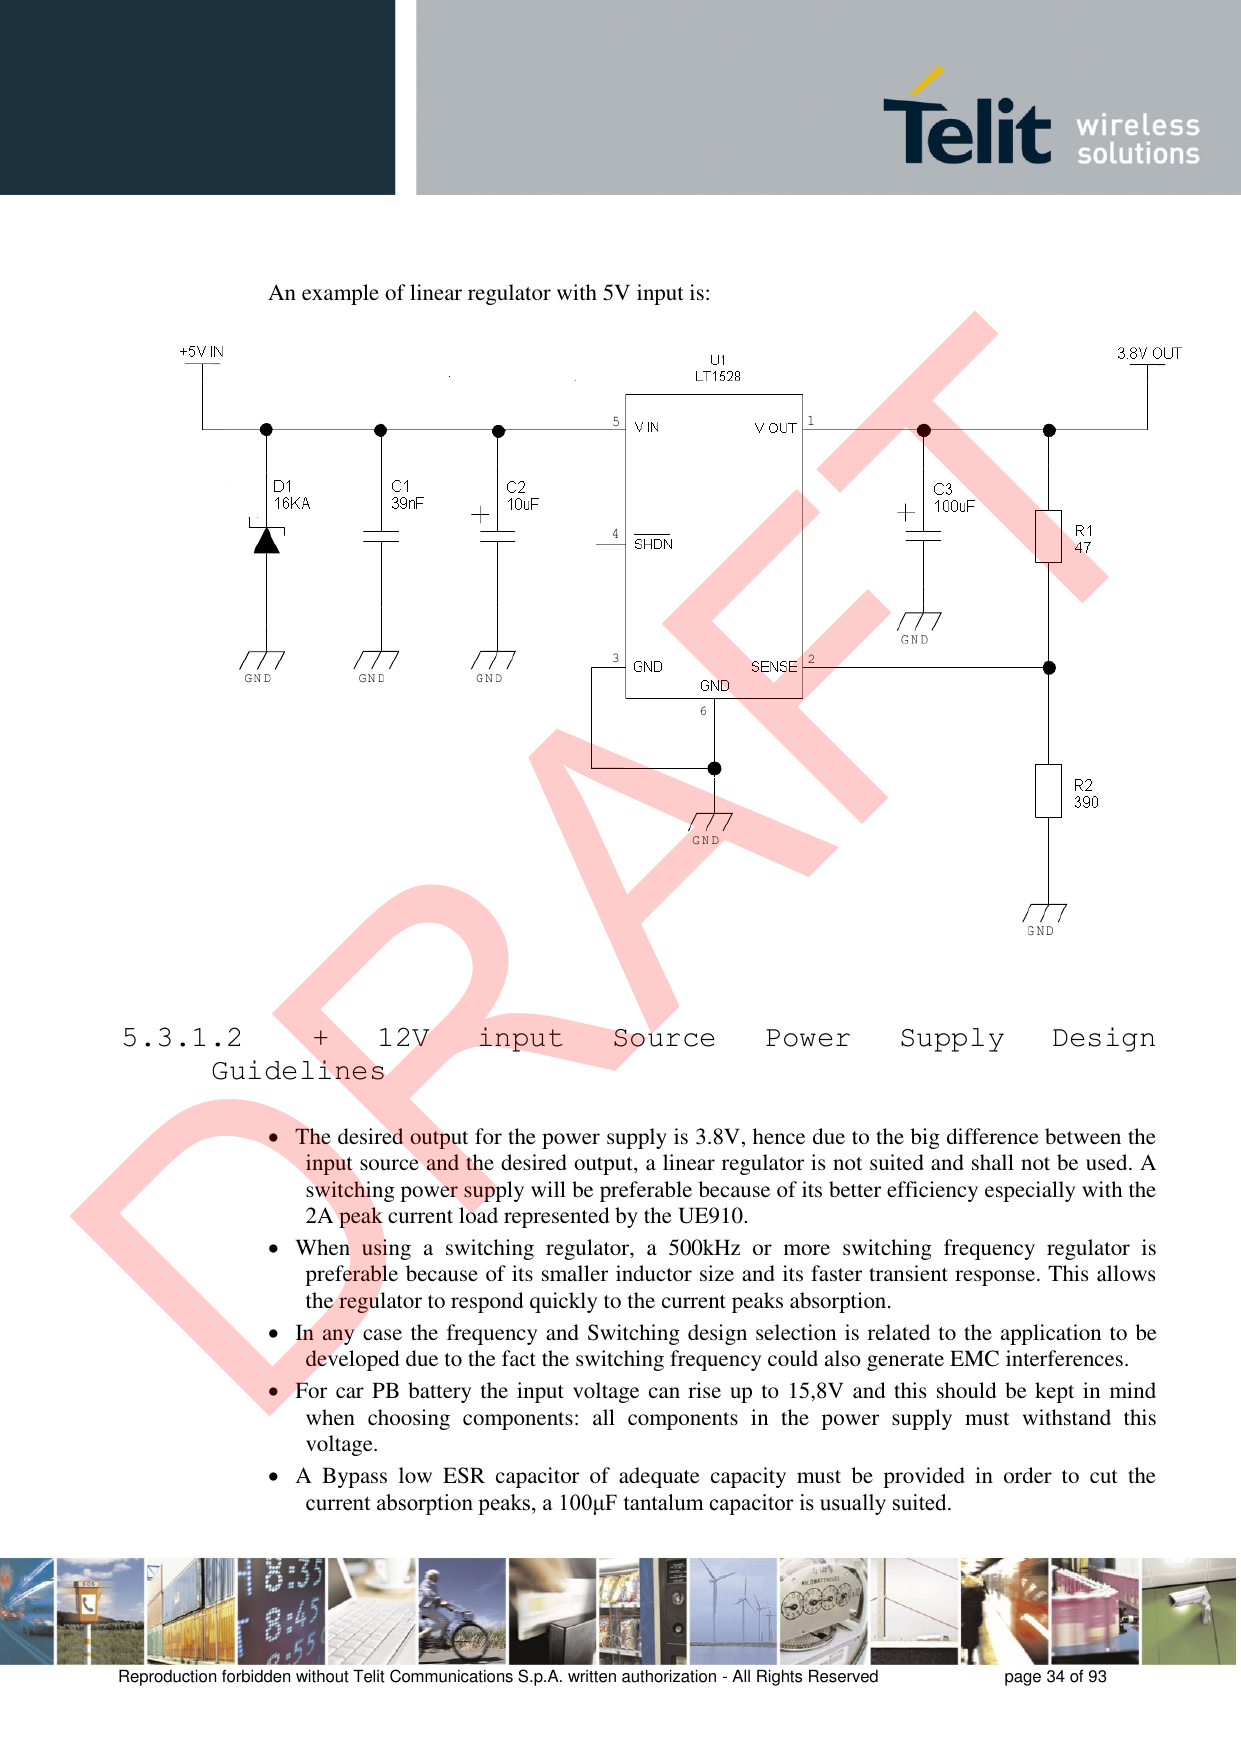 Reproduction forbidden without Telit Communications S.p.A. written authorization - All Rights Reserved  page 34 of 93 An example of linear regulator with 5V input is: 5.3.1.2  +  12V input  Source  Power  Supply  Design Guidelines The desired output for the power supply is 3.8V, hence due to the big difference between theinput source and the desired output, a linear regulator is not suited and shall not be used. Aswitching power supply will be preferable because of its better efficiency especially with the2A peak current load represented by the UE910.When  using  a  switching  regulator,  a  500kHz  or  more  switching  frequency  regulator  ispreferable because of its smaller inductor size and its faster transient response. This allowsthe regulator to respond quickly to the current peaks absorption.In any case the frequency and Switching design selection is related to the application to bedeveloped due to the fact the switching frequency could also generate EMC interferences.For car PB battery the input voltage can rise up to 15,8V and this should be kept in mindwhen  choosing  components:  all  components  in  the  power  supply  must  withstand  thisvoltage.A  Bypass  low  ESR  capacitor  of  adequate  capacity  must  be  provided  in  order  to  cut  thecurrent absorption peaks, a 100μF tantalum capacitor is usually suited.DRAFT